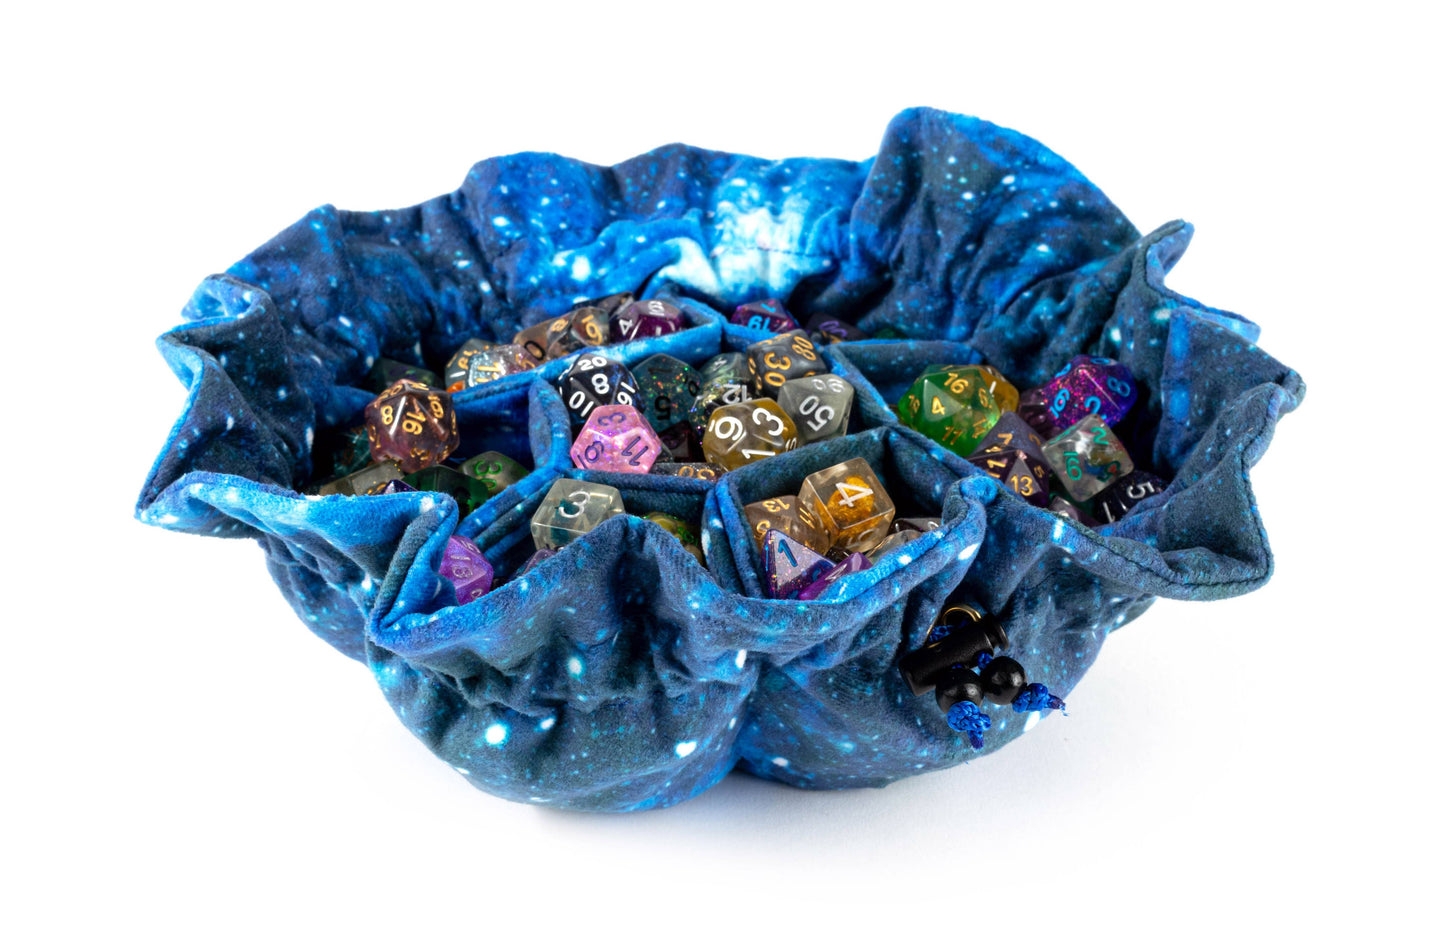 Blue Velvet Compartment Dice Bag with Pockets